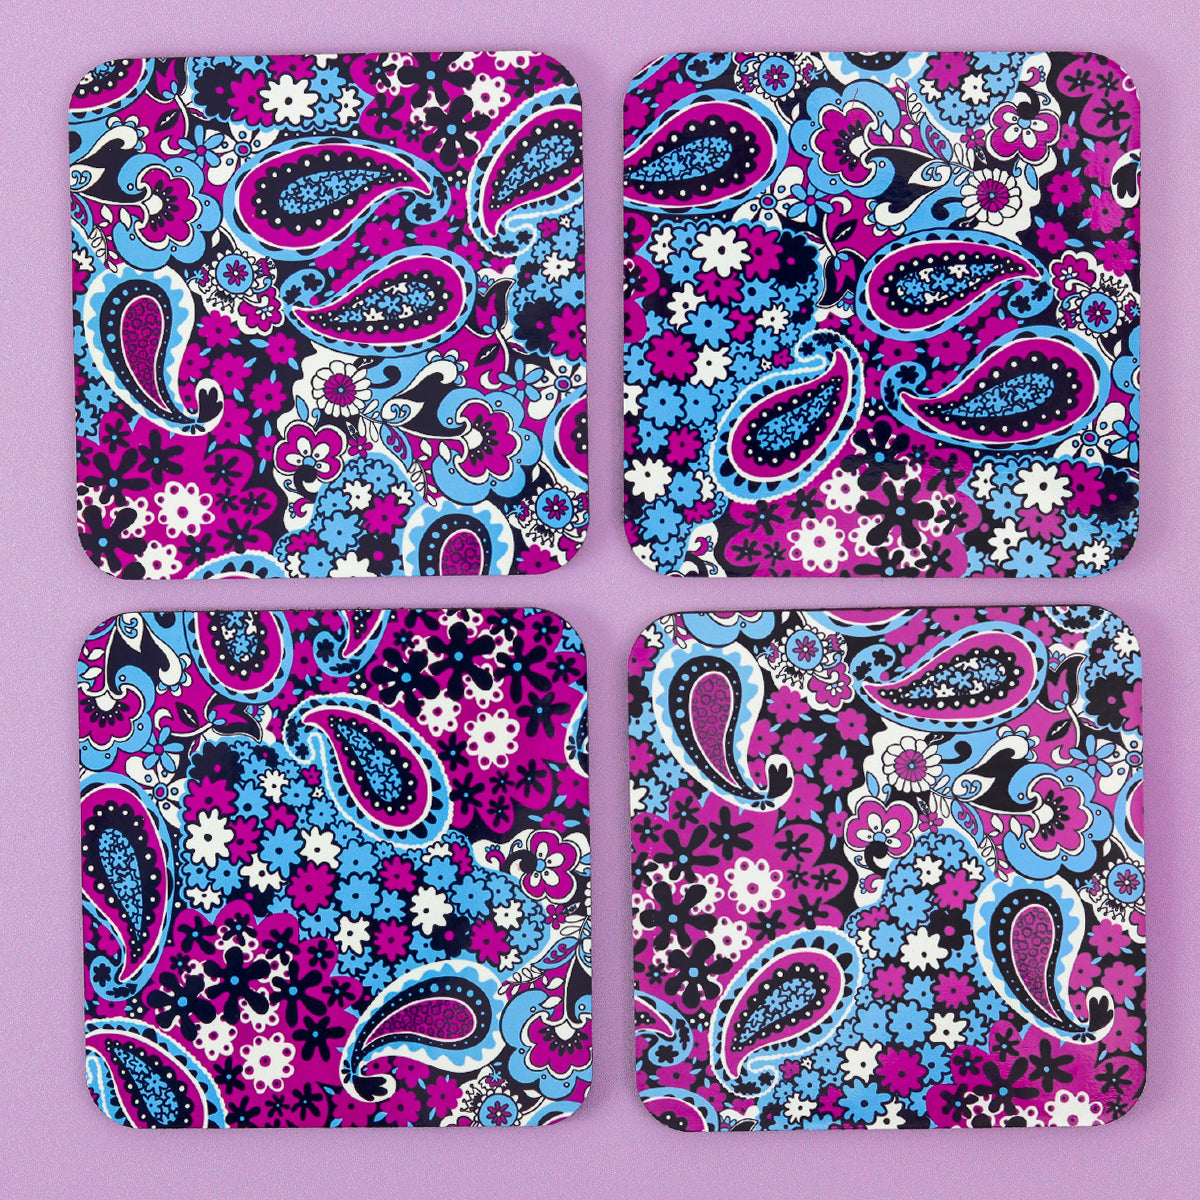 Floral Paisley Coasters